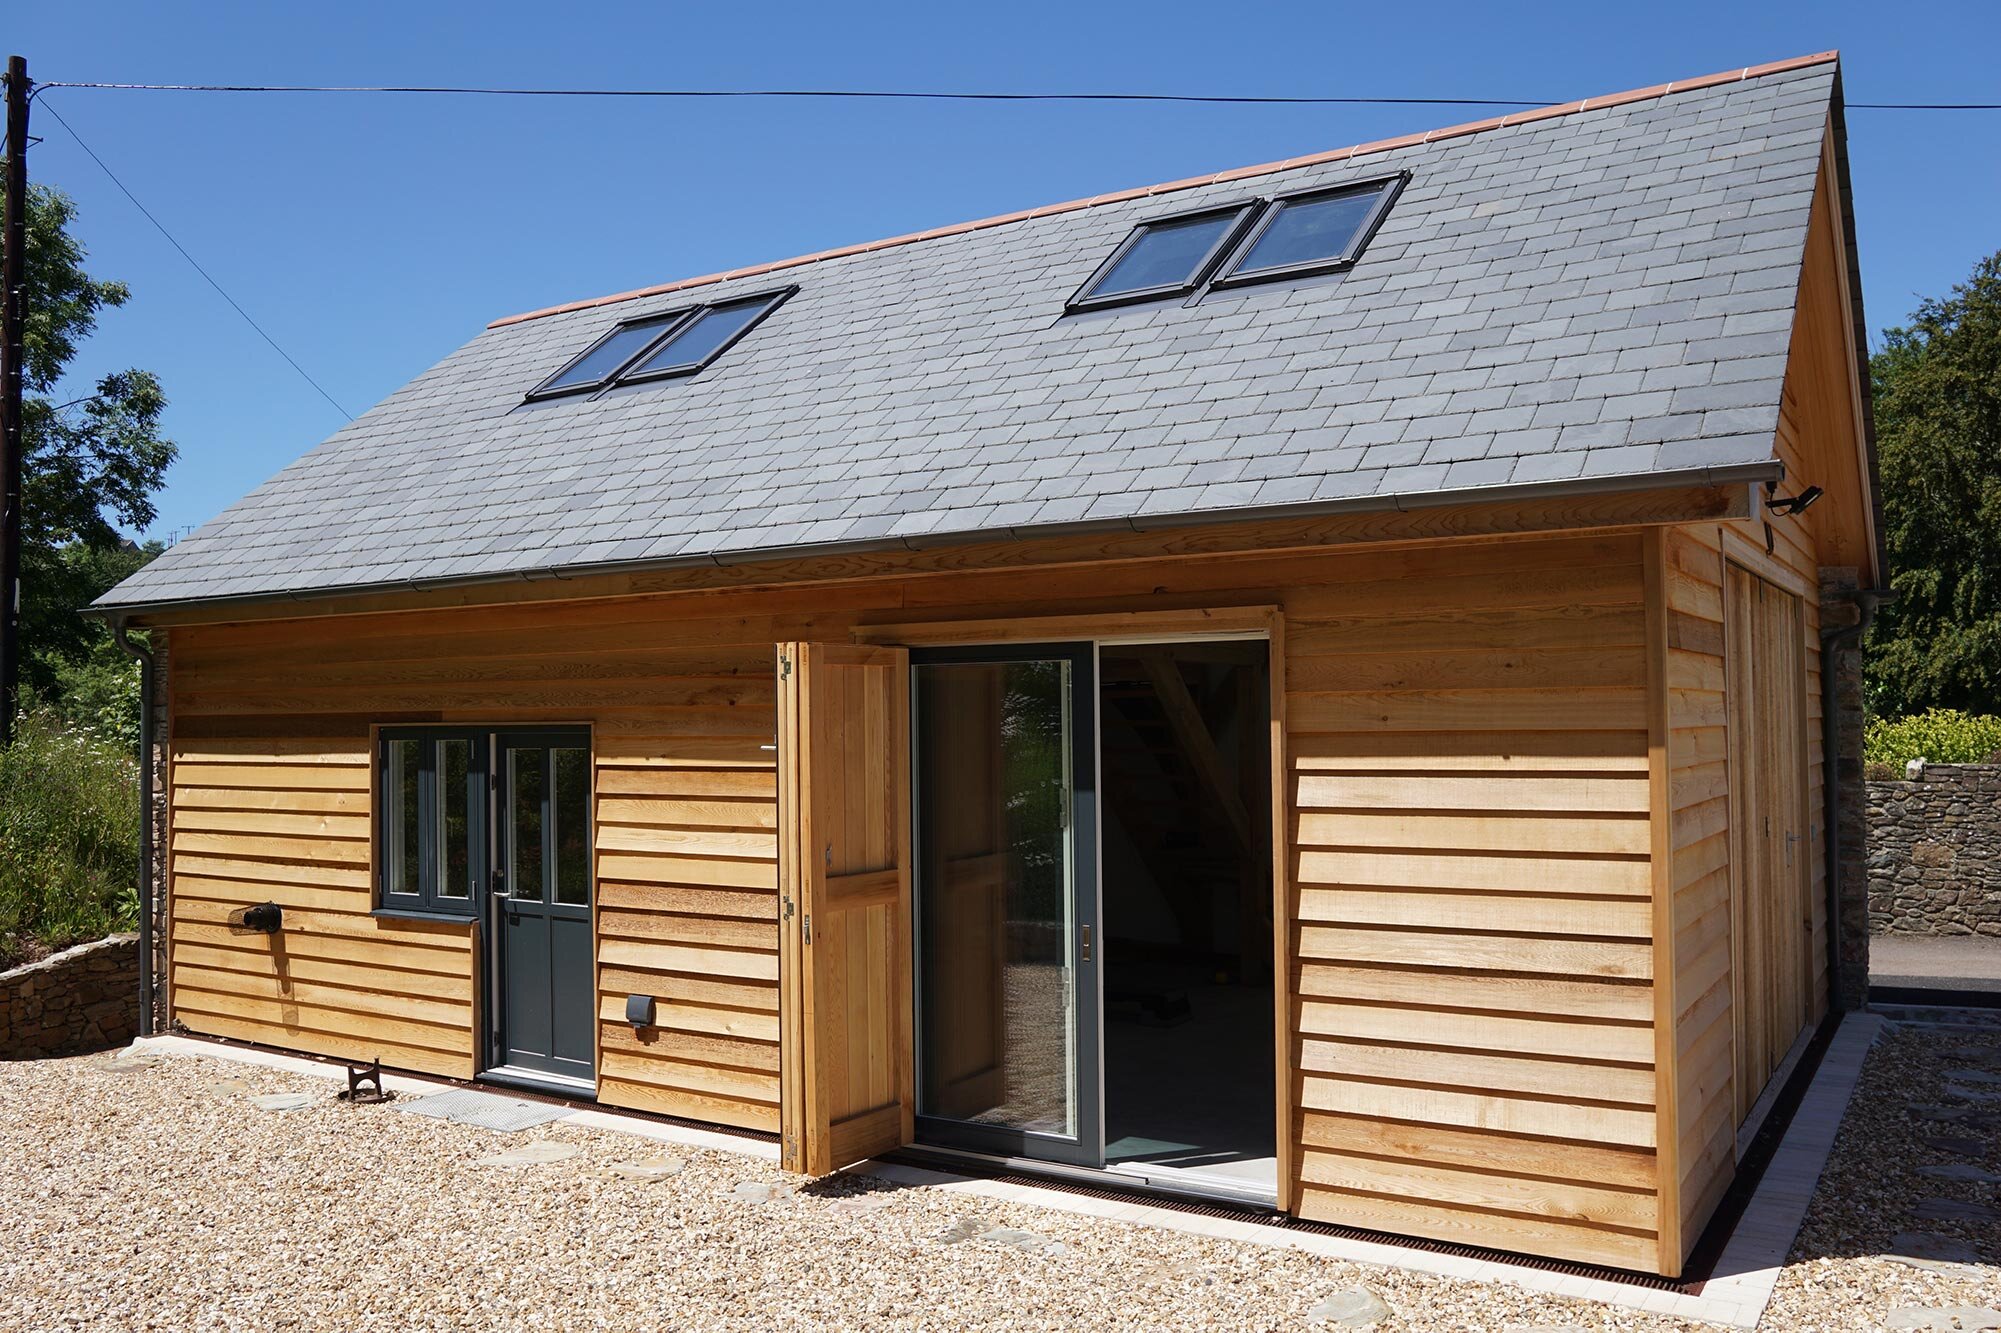 Timber framed garage and workshop with open bifold doors